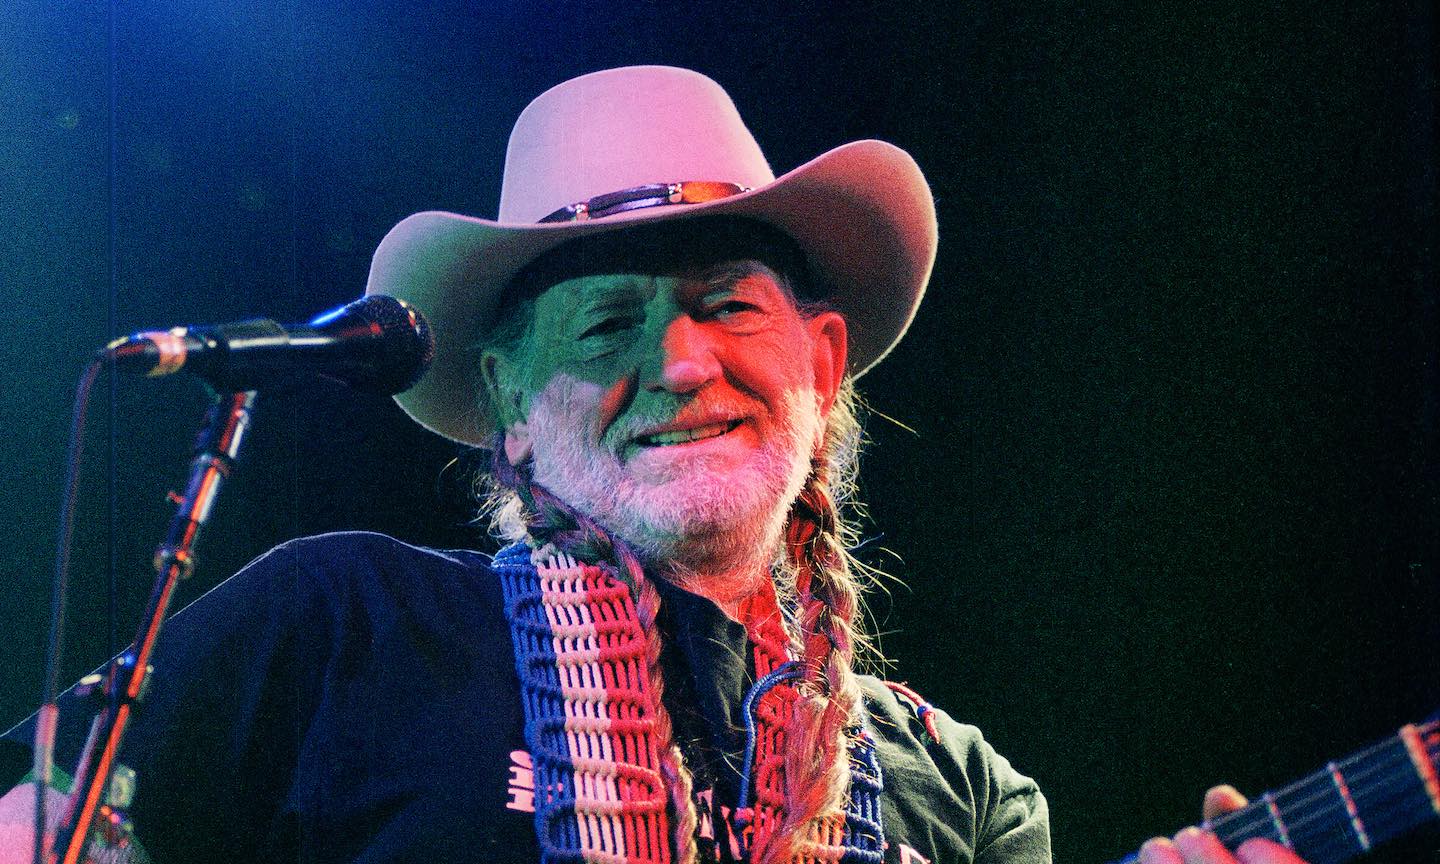 10 Times Country Stars Made An Appearance On 'King Of The Hill' Featuring  Willie Nelson, Kid Rock & More